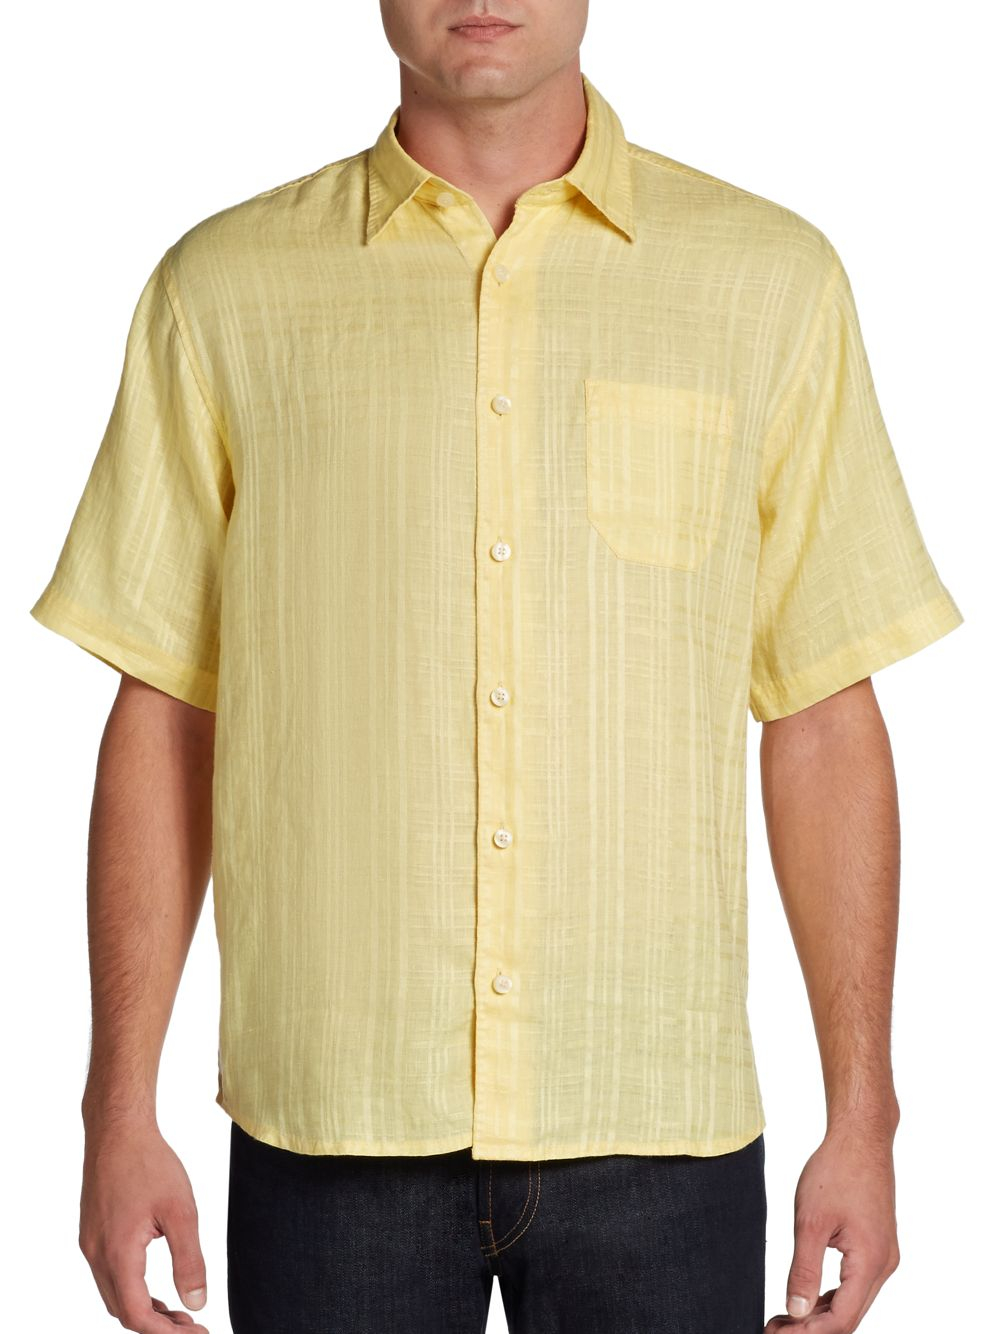 Lyst - Tommy Bahama Via Palermo Linen Plaid Shirt in Yellow for Men